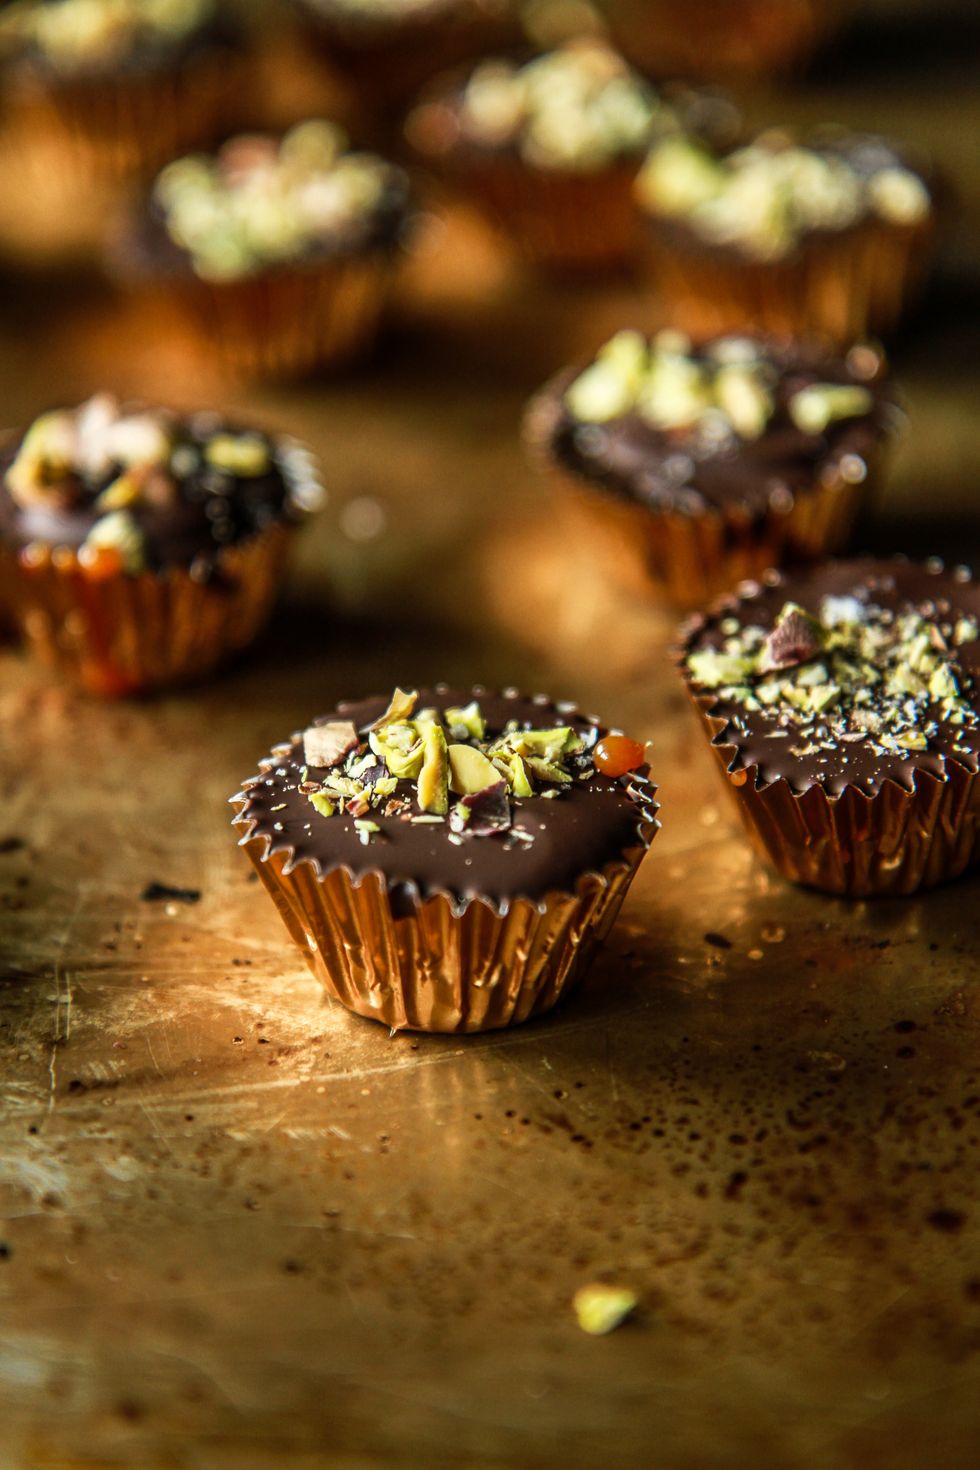 Chocolate Bourbon Caramel Cups with Salted Pistachios